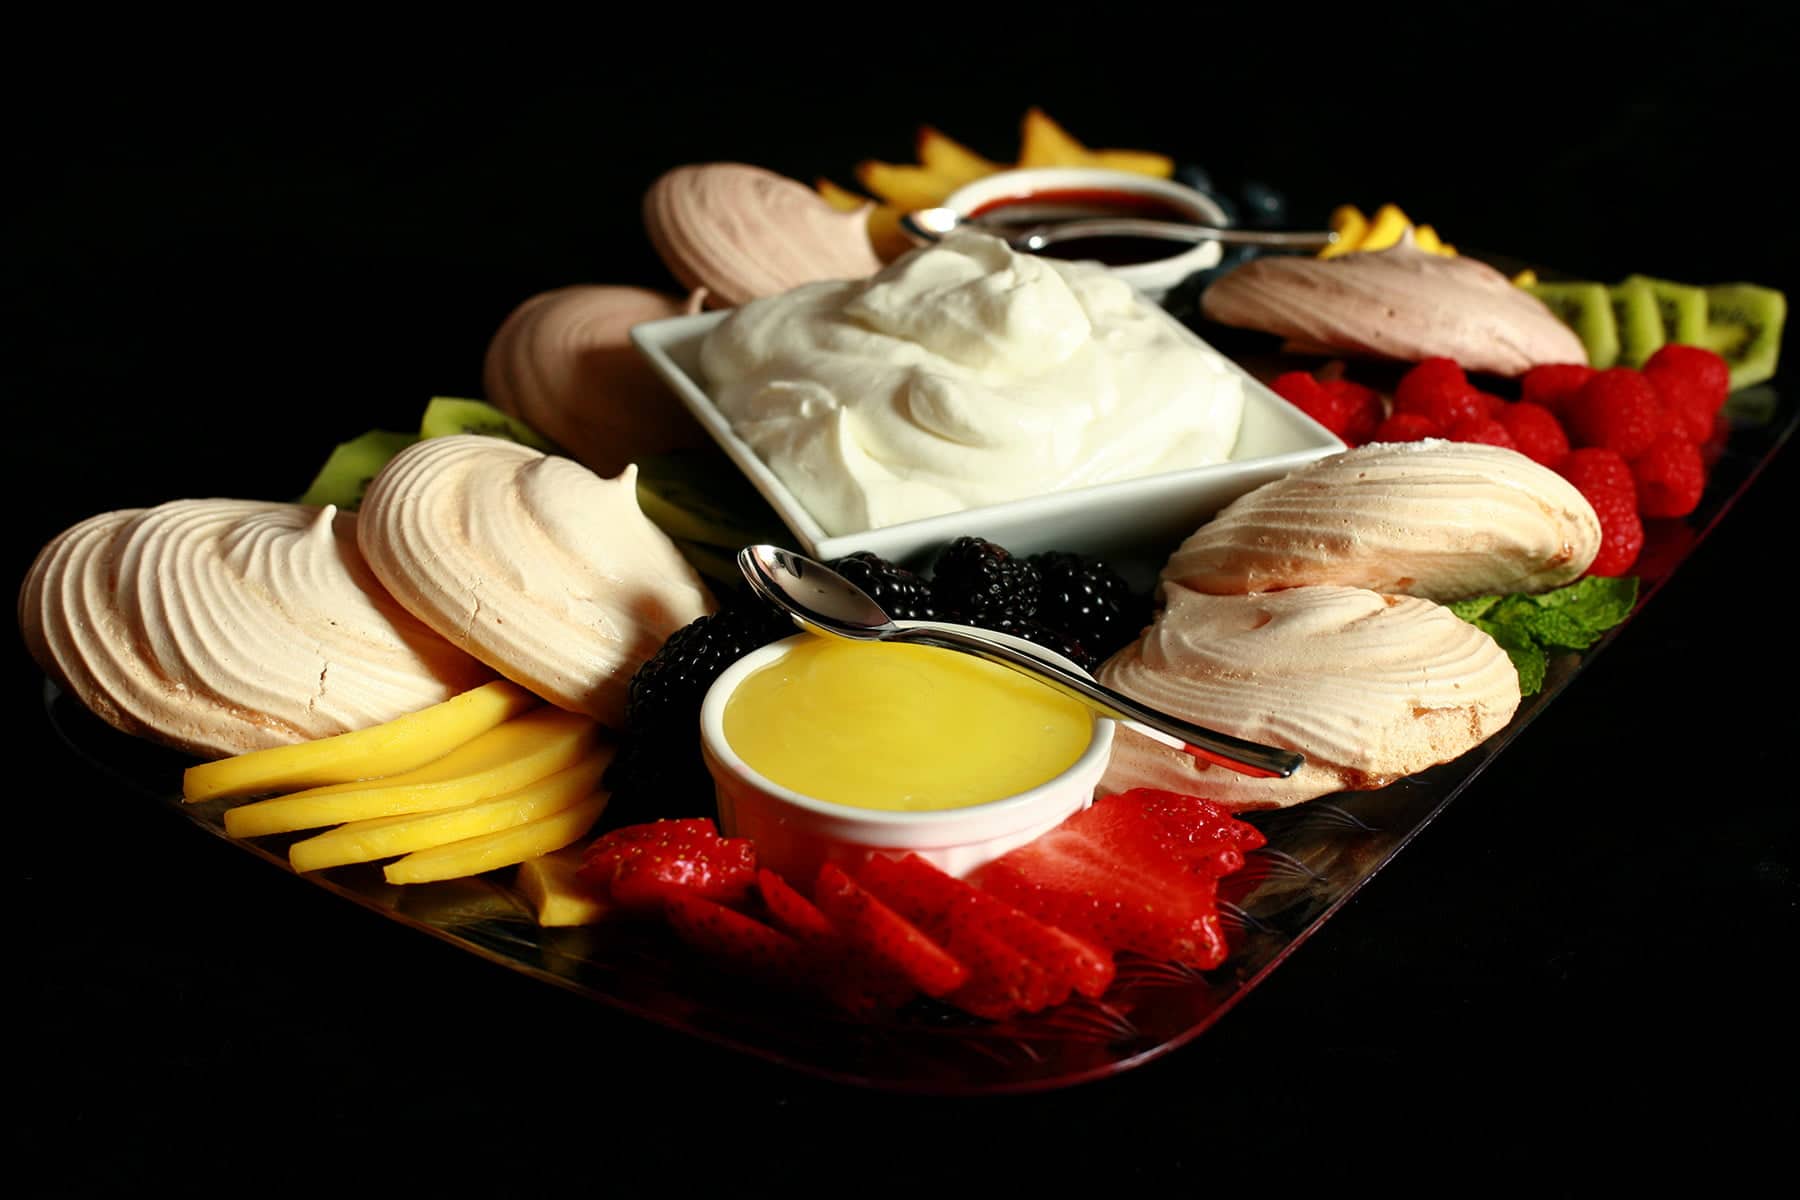 A Pavlova Dessert Charcuterie board: A bowl of whipped cream and two little bowls of sauce - lemon curd and chocolate sauce - are surrounded by mini pavlova meringues and a selection of fresh fruits.